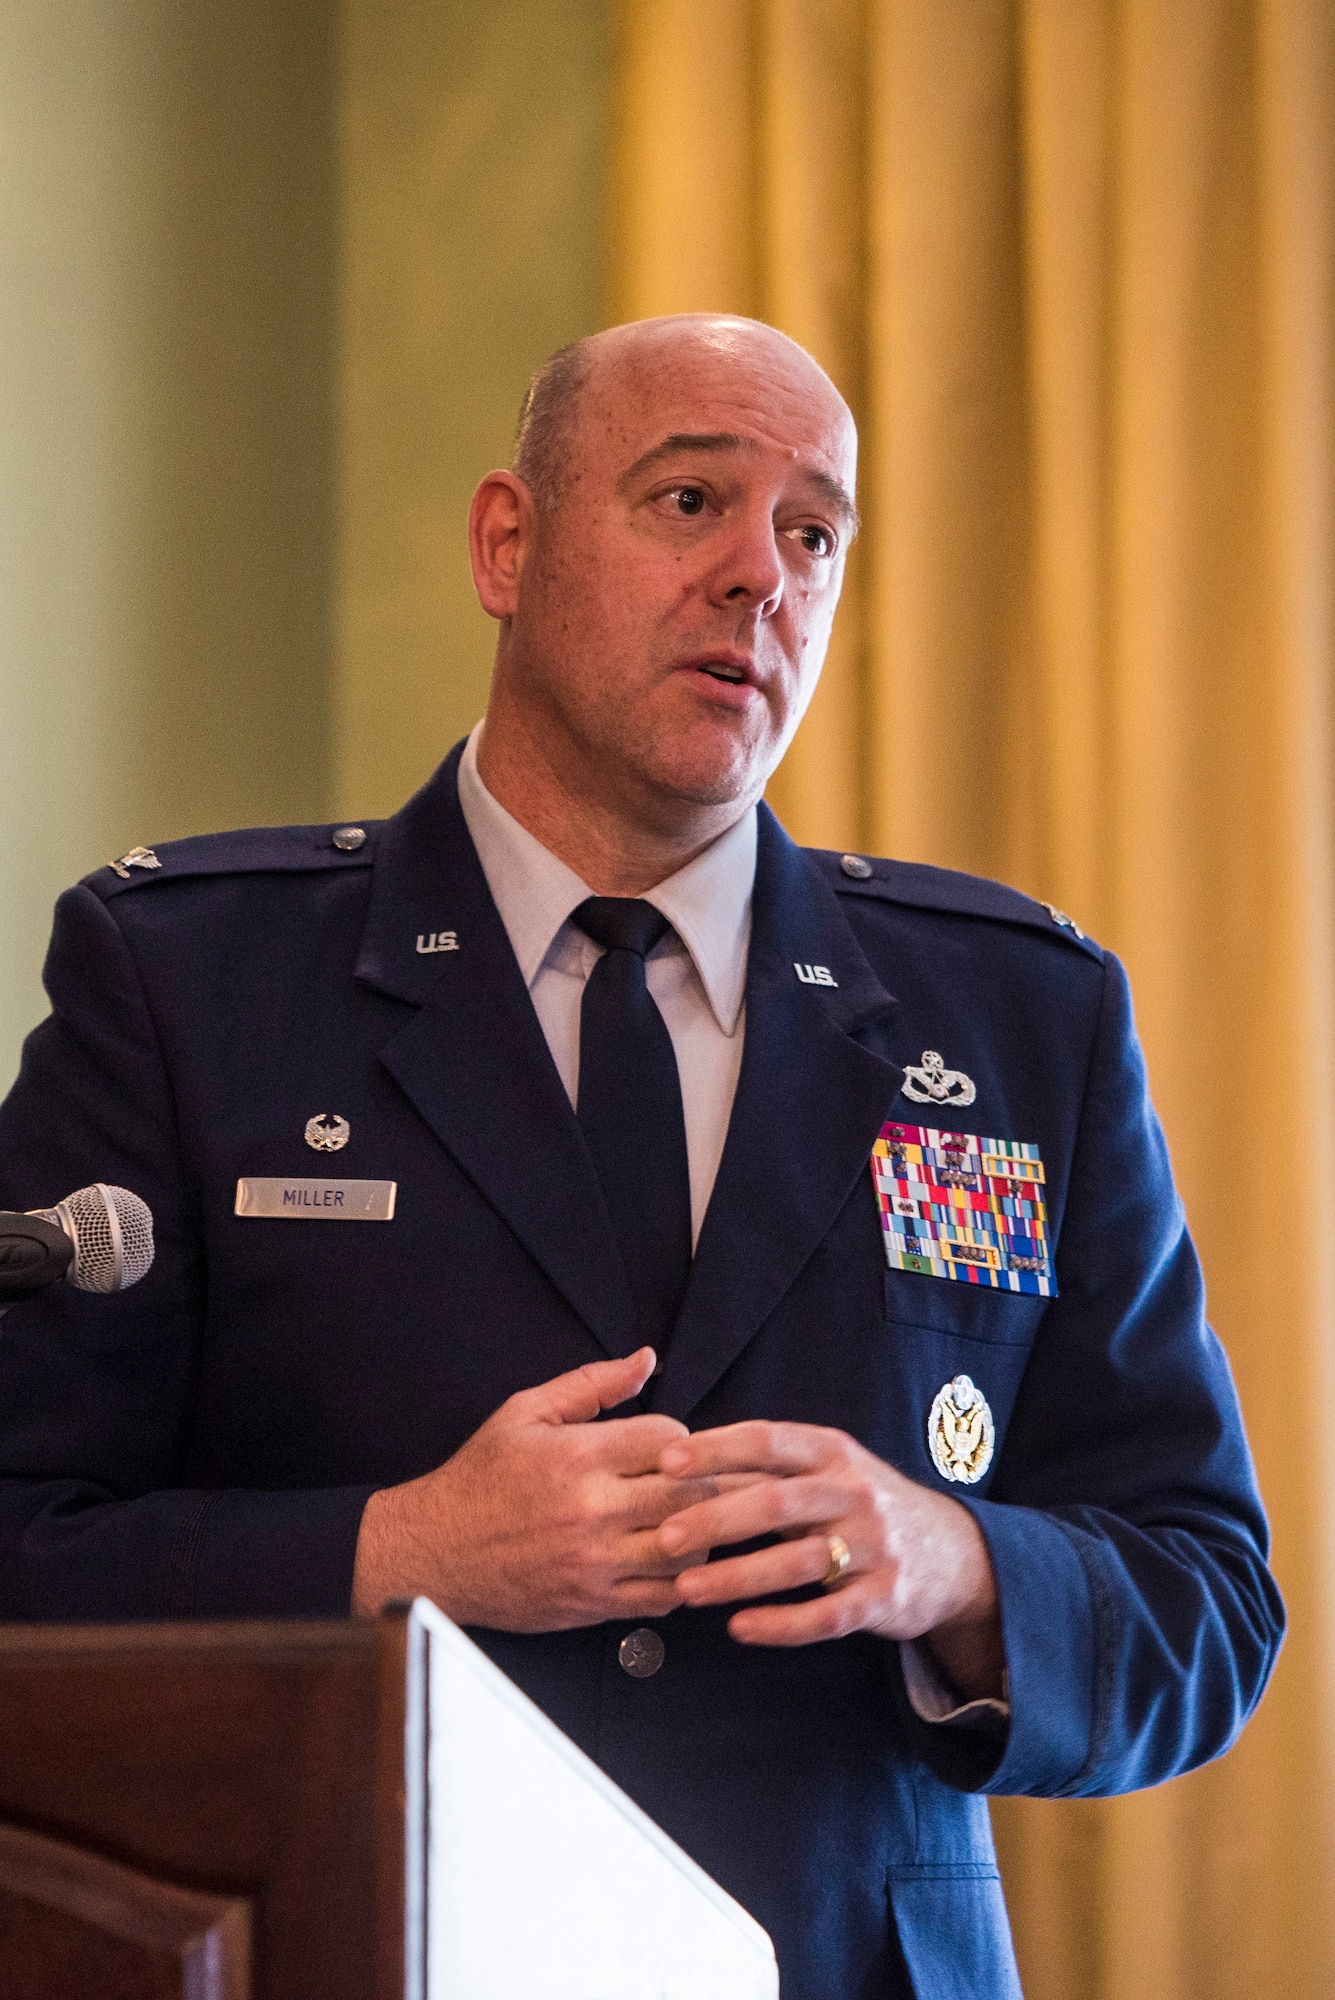 U.S. Air Force Col. Patrick Miller, 88th Air Base Wing and Installation commander, speaks during a ceremony for Bronze Star Medal recipient Master Sgt. Wendi DiBartolomeo, April 15, 2022 at Wright-Patterson Air Force Base, Ohio. DiBartolomeo was awarded the Bronze Star for her actions during Operation Allies Refuge in Kabul, Afghanistan.